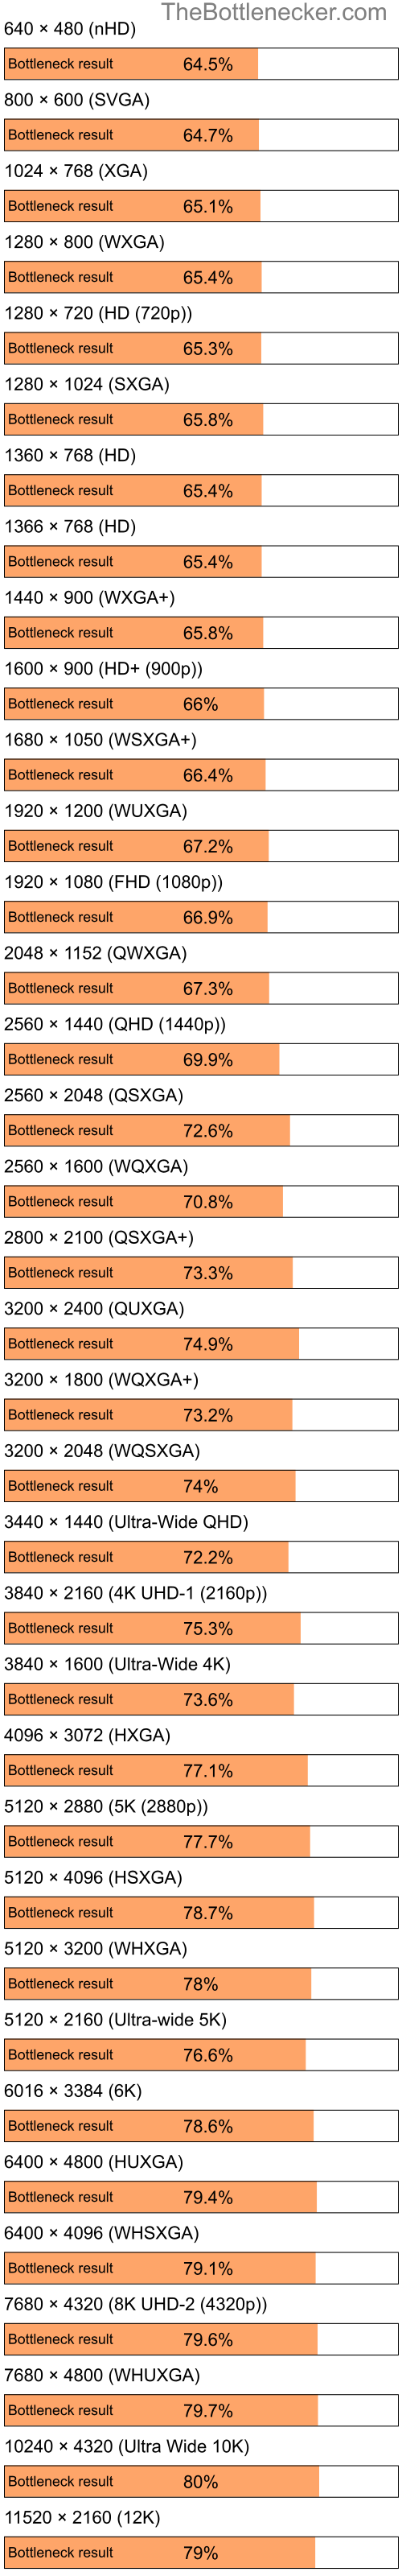 Bottleneck results by resolution for Intel Pentium 4 and NVIDIA Quadro FX 540 in General Tasks